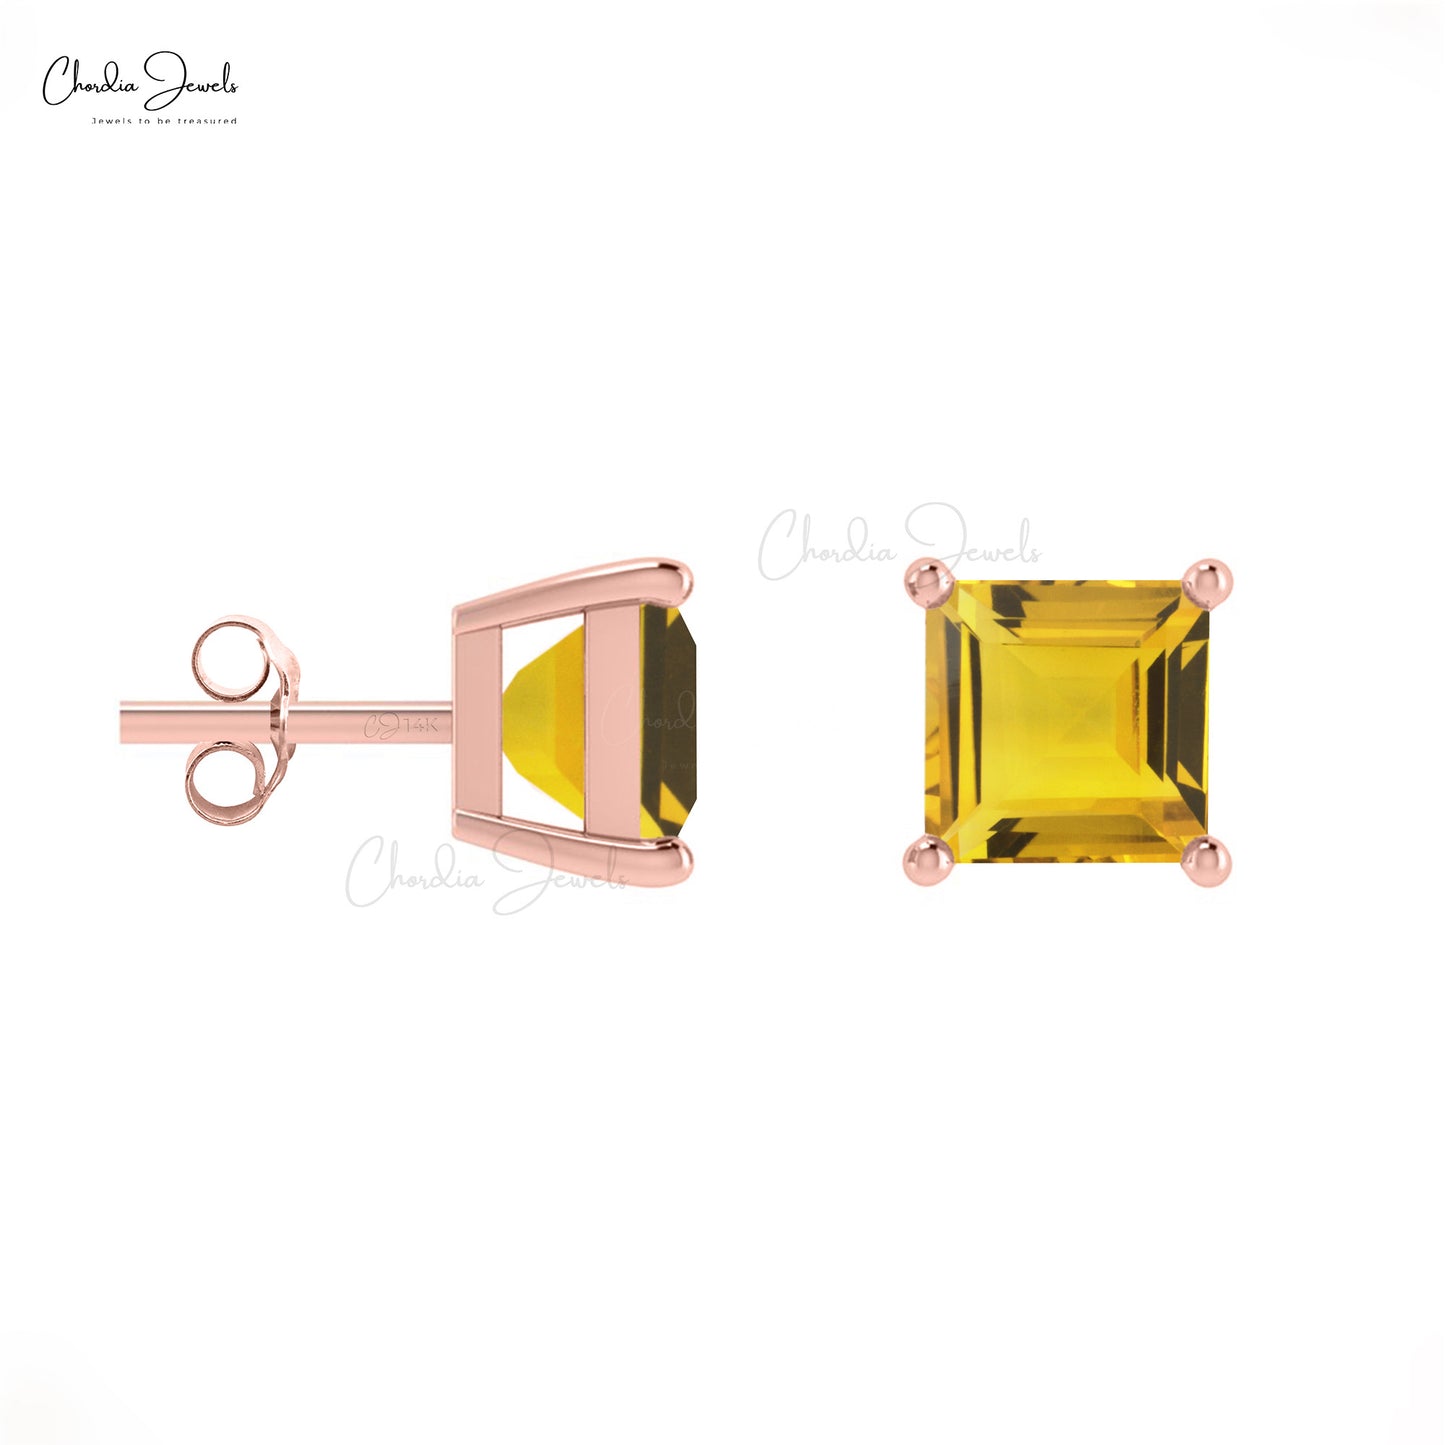 Authentic Citrine 4mm Square Cut 0.7 Ct Gemstone Stud Earring For Anniversary Gift 14k Solid Gold November Birthstone 4-Prong Set Minimalist Jewelry